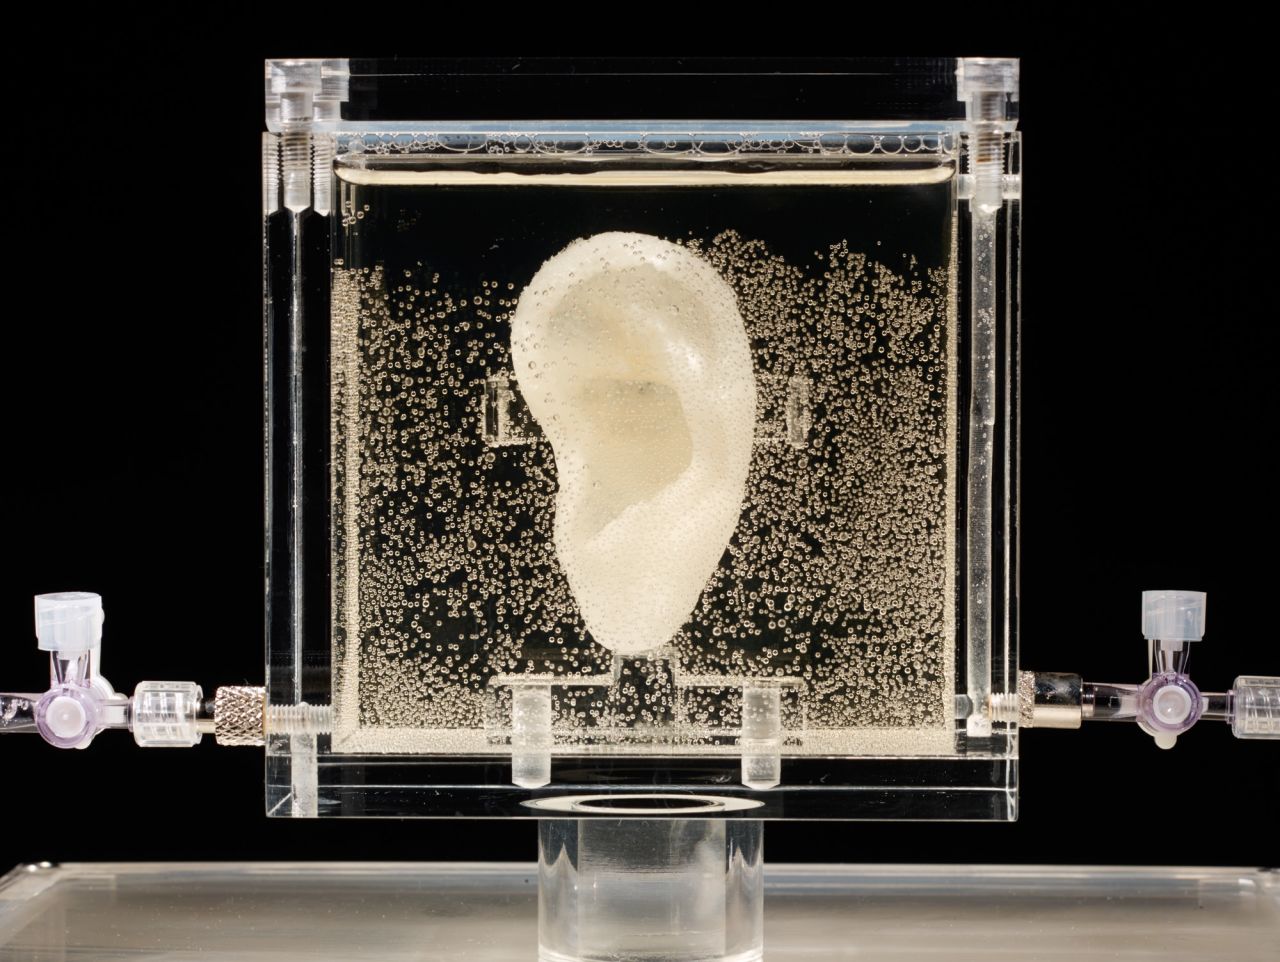 This is Van Gogh's left ear. The one he famously chopped off. Kind of. Artist <a href="http://diemutstrebe.altervista.org/" target="_blank" target="_blank">Diemut Strebe</a> worked with stem cell scientists -- including the creator of the controversial "<a href="http://en.wikipedia.org/wiki/Vacanti_mouse" target="_blank" target="_blank">ear mouse</a>" -- to grow the cartilage over the period of a year in a bioreactor, using tissue donated by a living relative of the tortured Dutch painter.